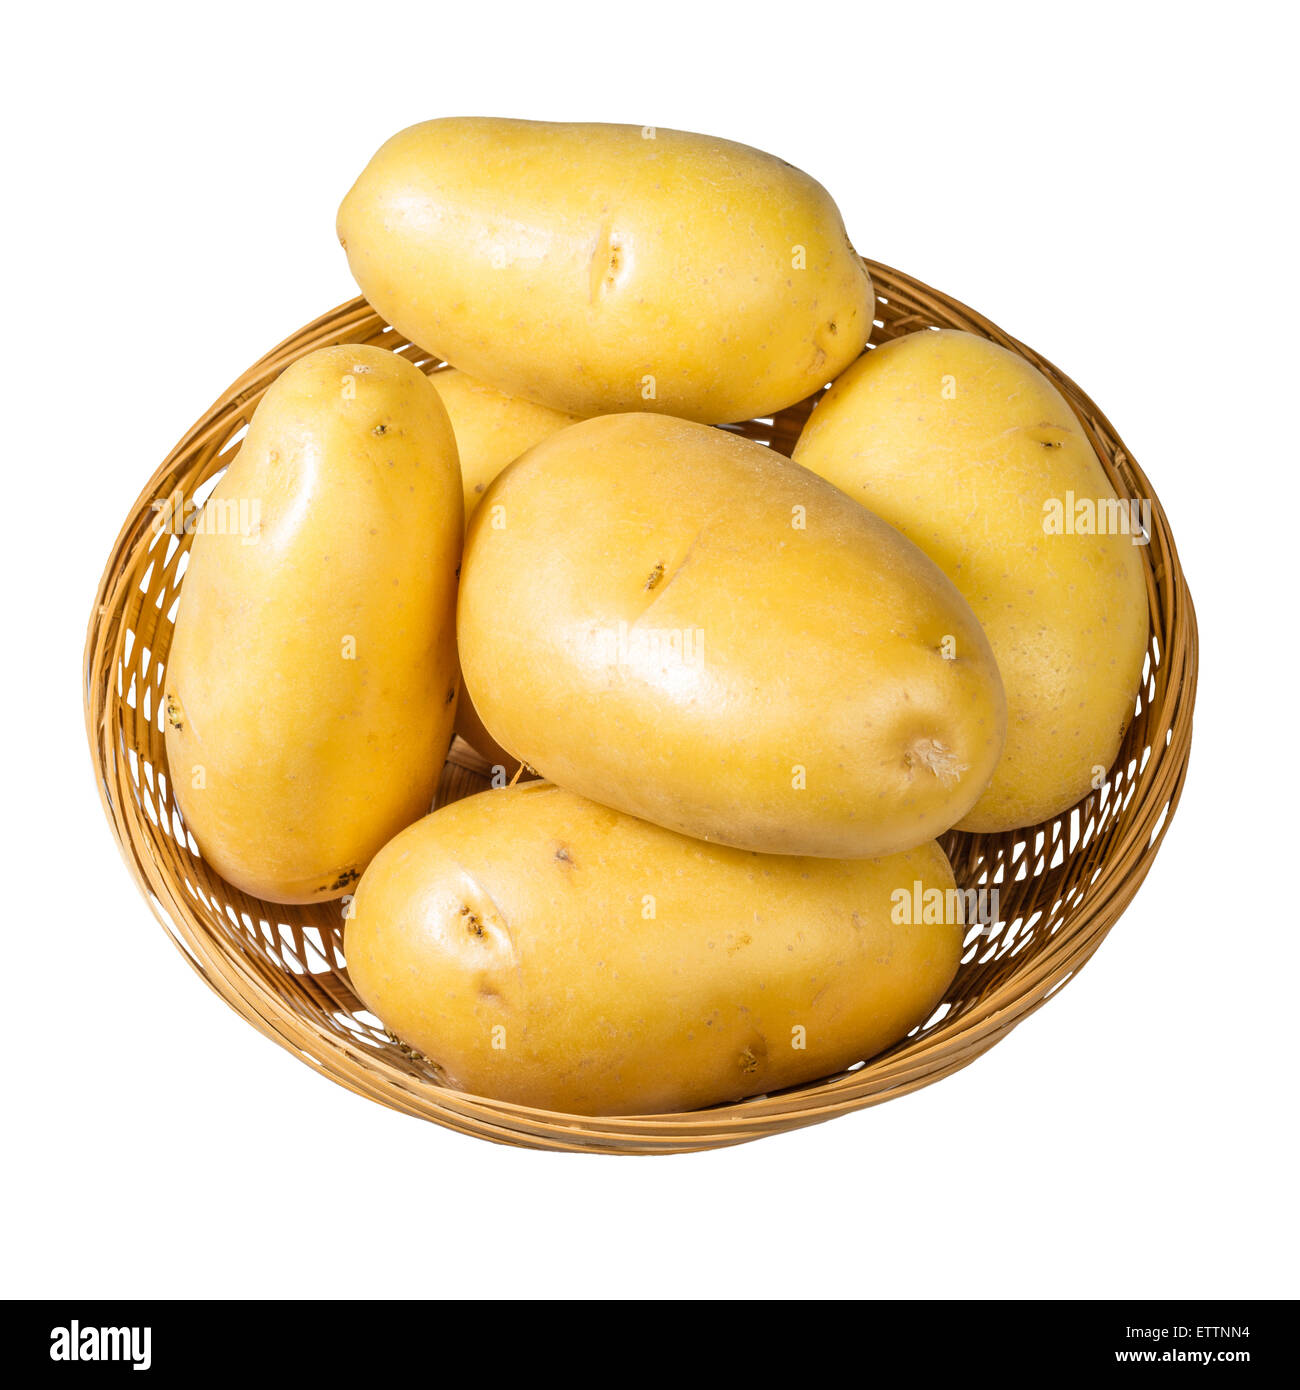 White potatoes fresh picked in wicker bowl isolated on white Stock Photo